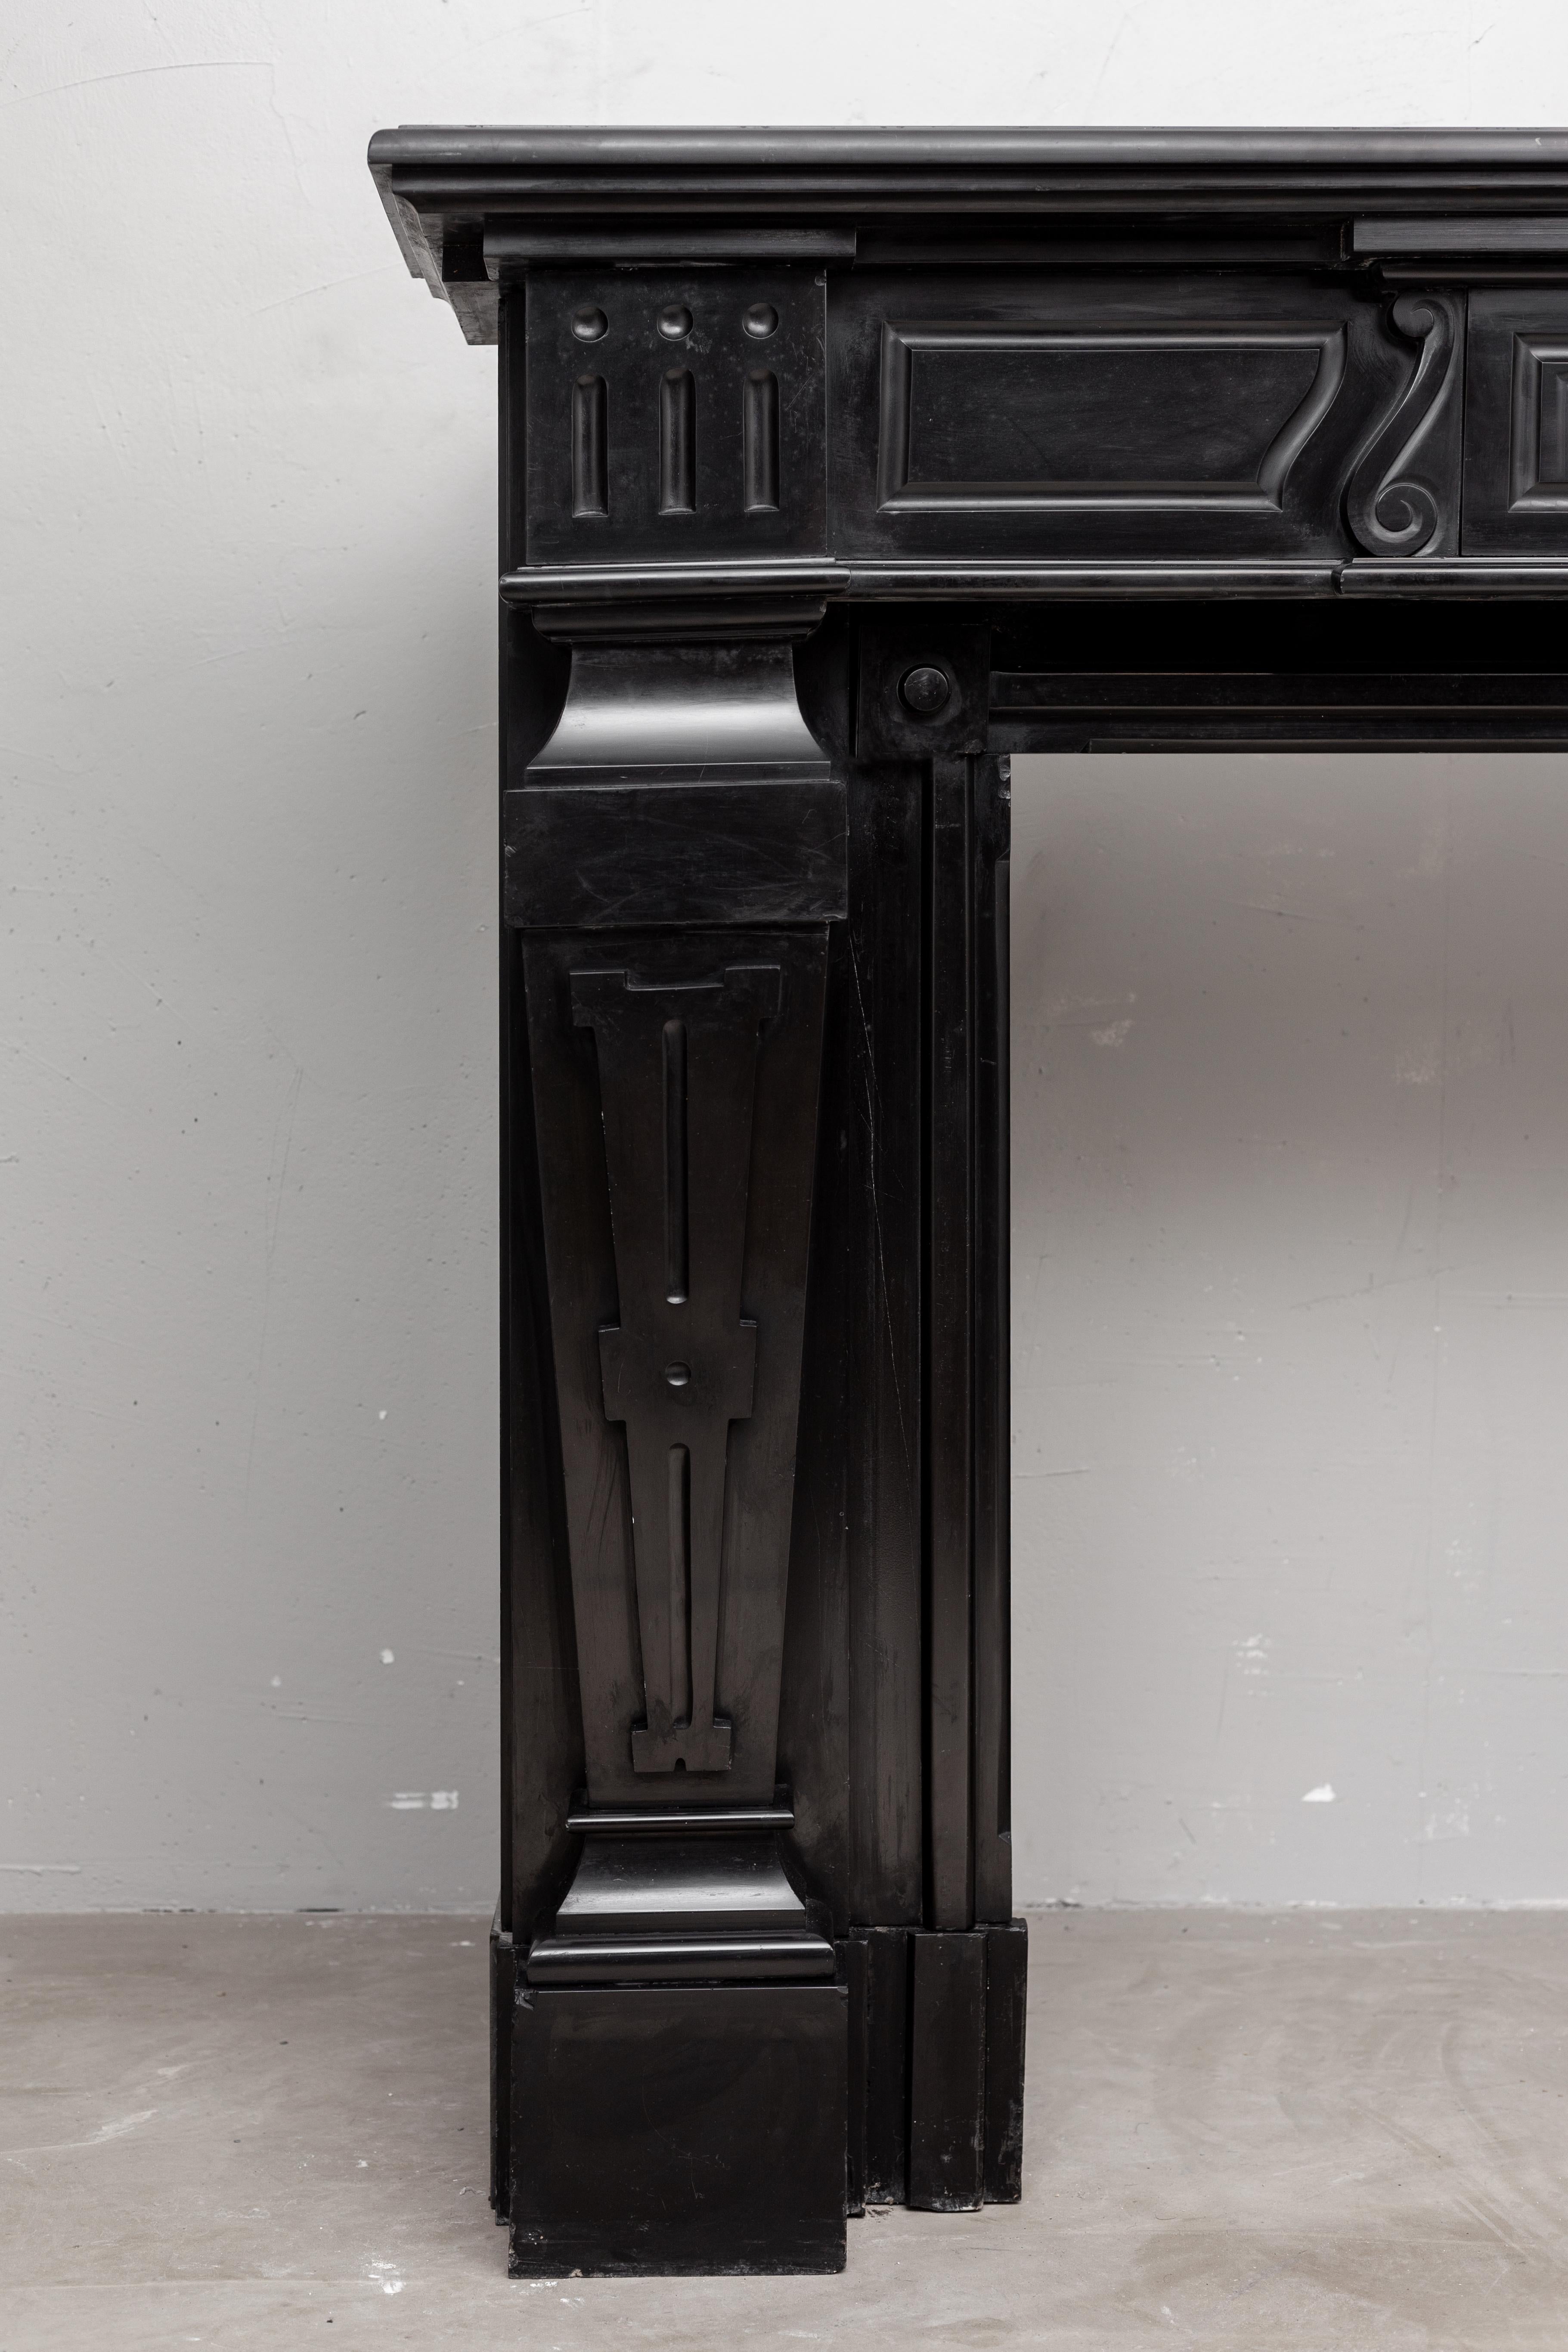 Statity and radiance meet in this wonderful fireplace in Empire style. Made from luxurious Noir de Mazy marble, this piece brings warmth and elegance to any interior. The chimney originates in the Statenkwartier in The Hague between the Art Nouveau